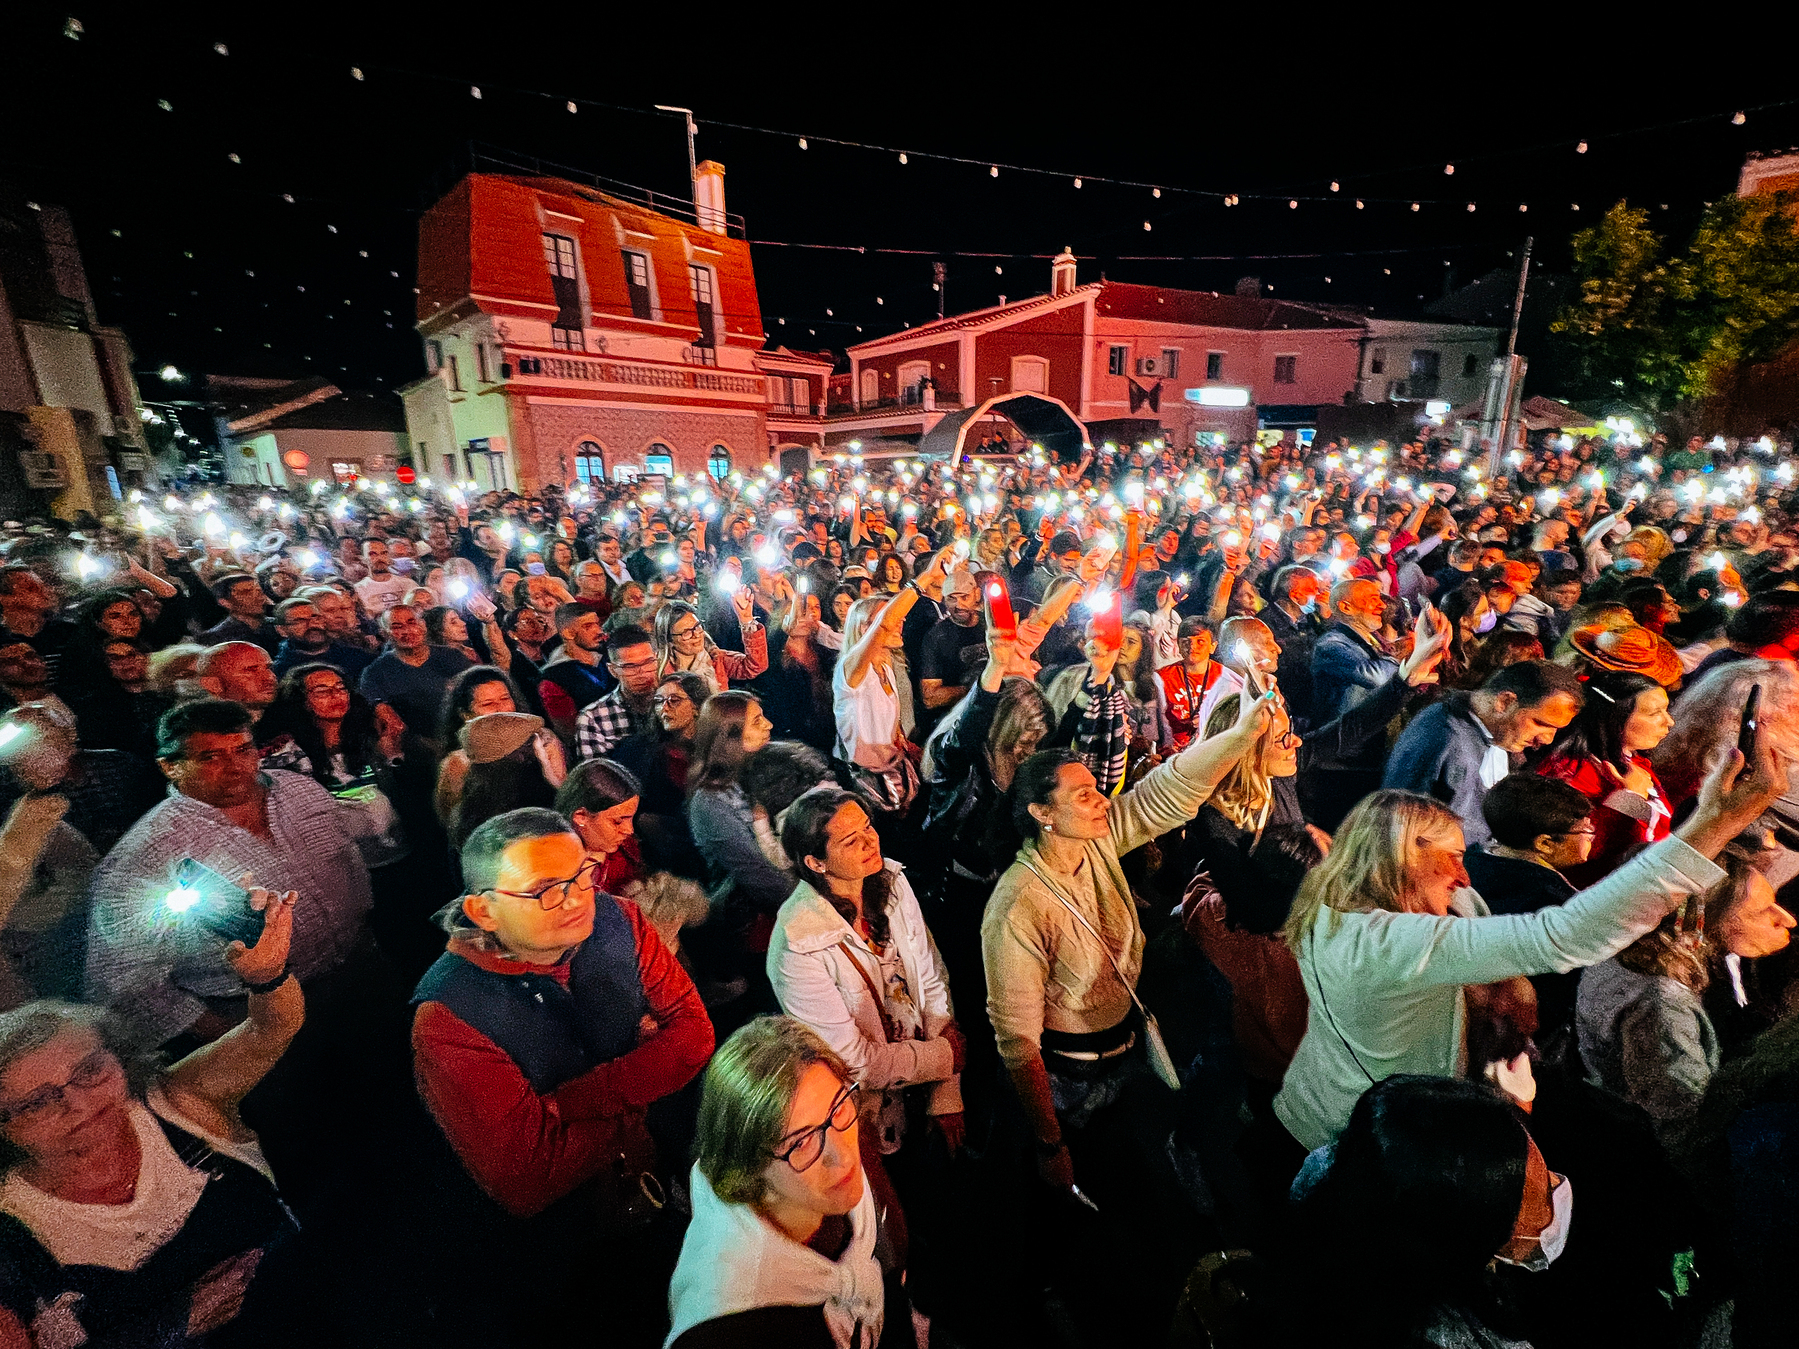 A crowd hold up their phones with the lantern turned on during a concert.